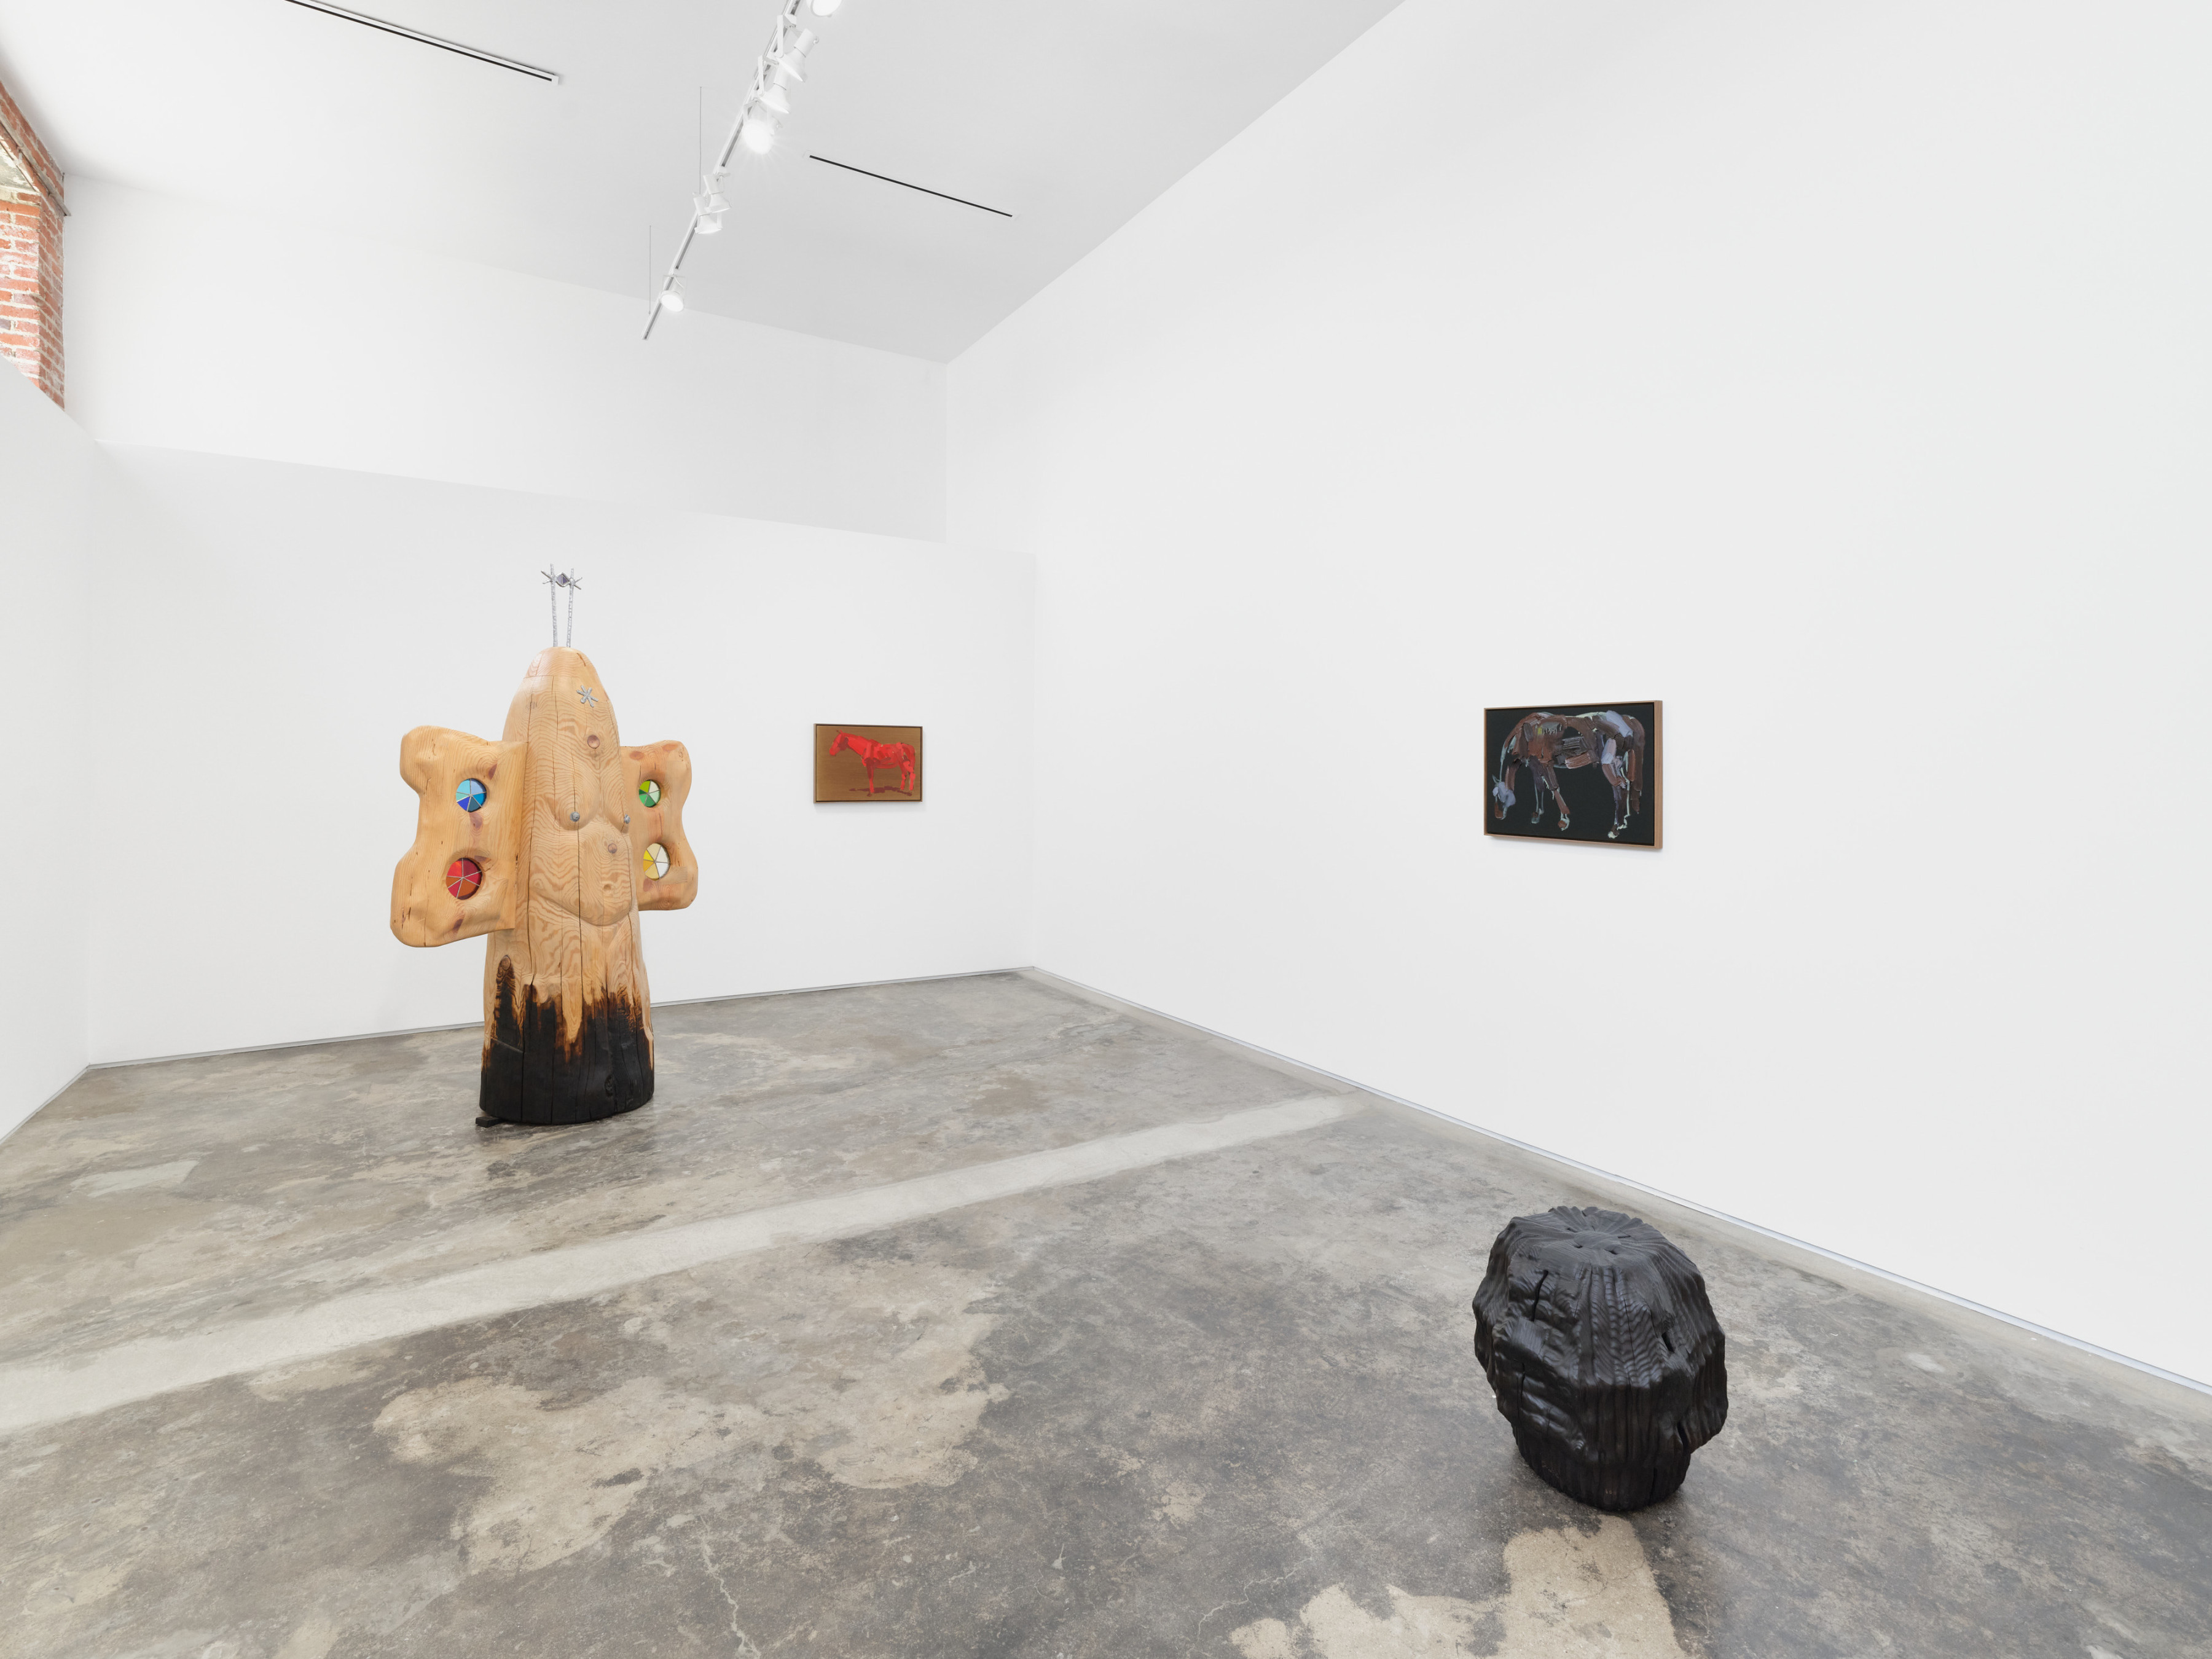 Installation view of "Dan John Anderson and Andy Woll”